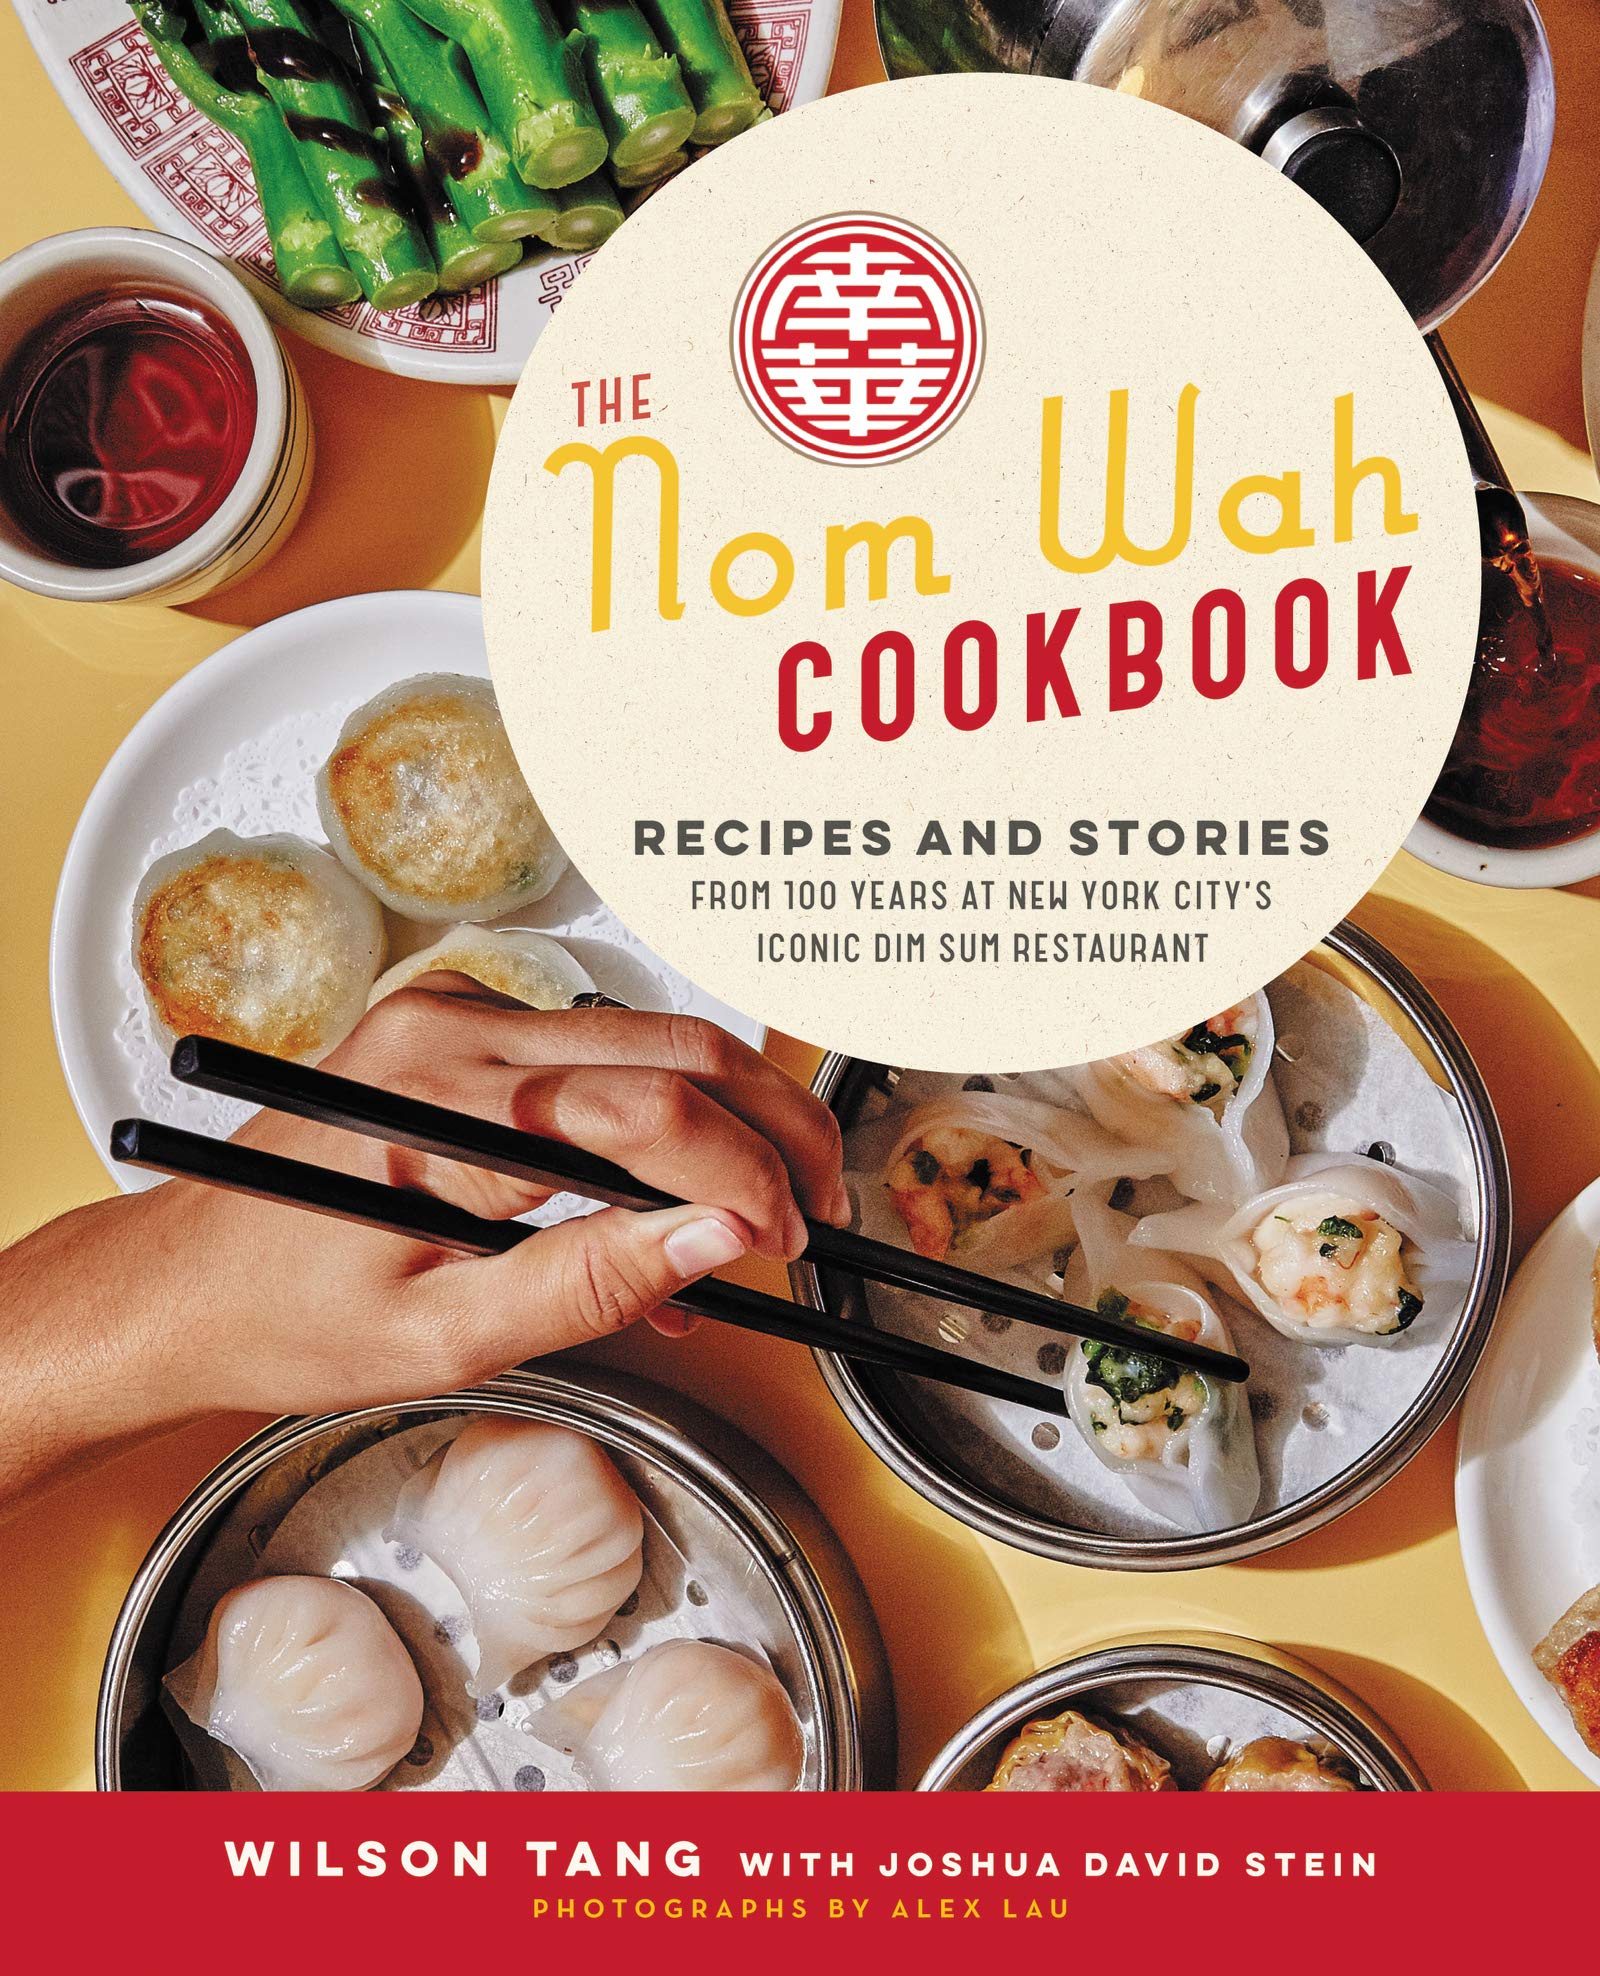 The Nom Wah Cookbook: Recipes and Stories from 100 Years at New York City's Iconic Dim Sum Restaurant (Wilson Tang)